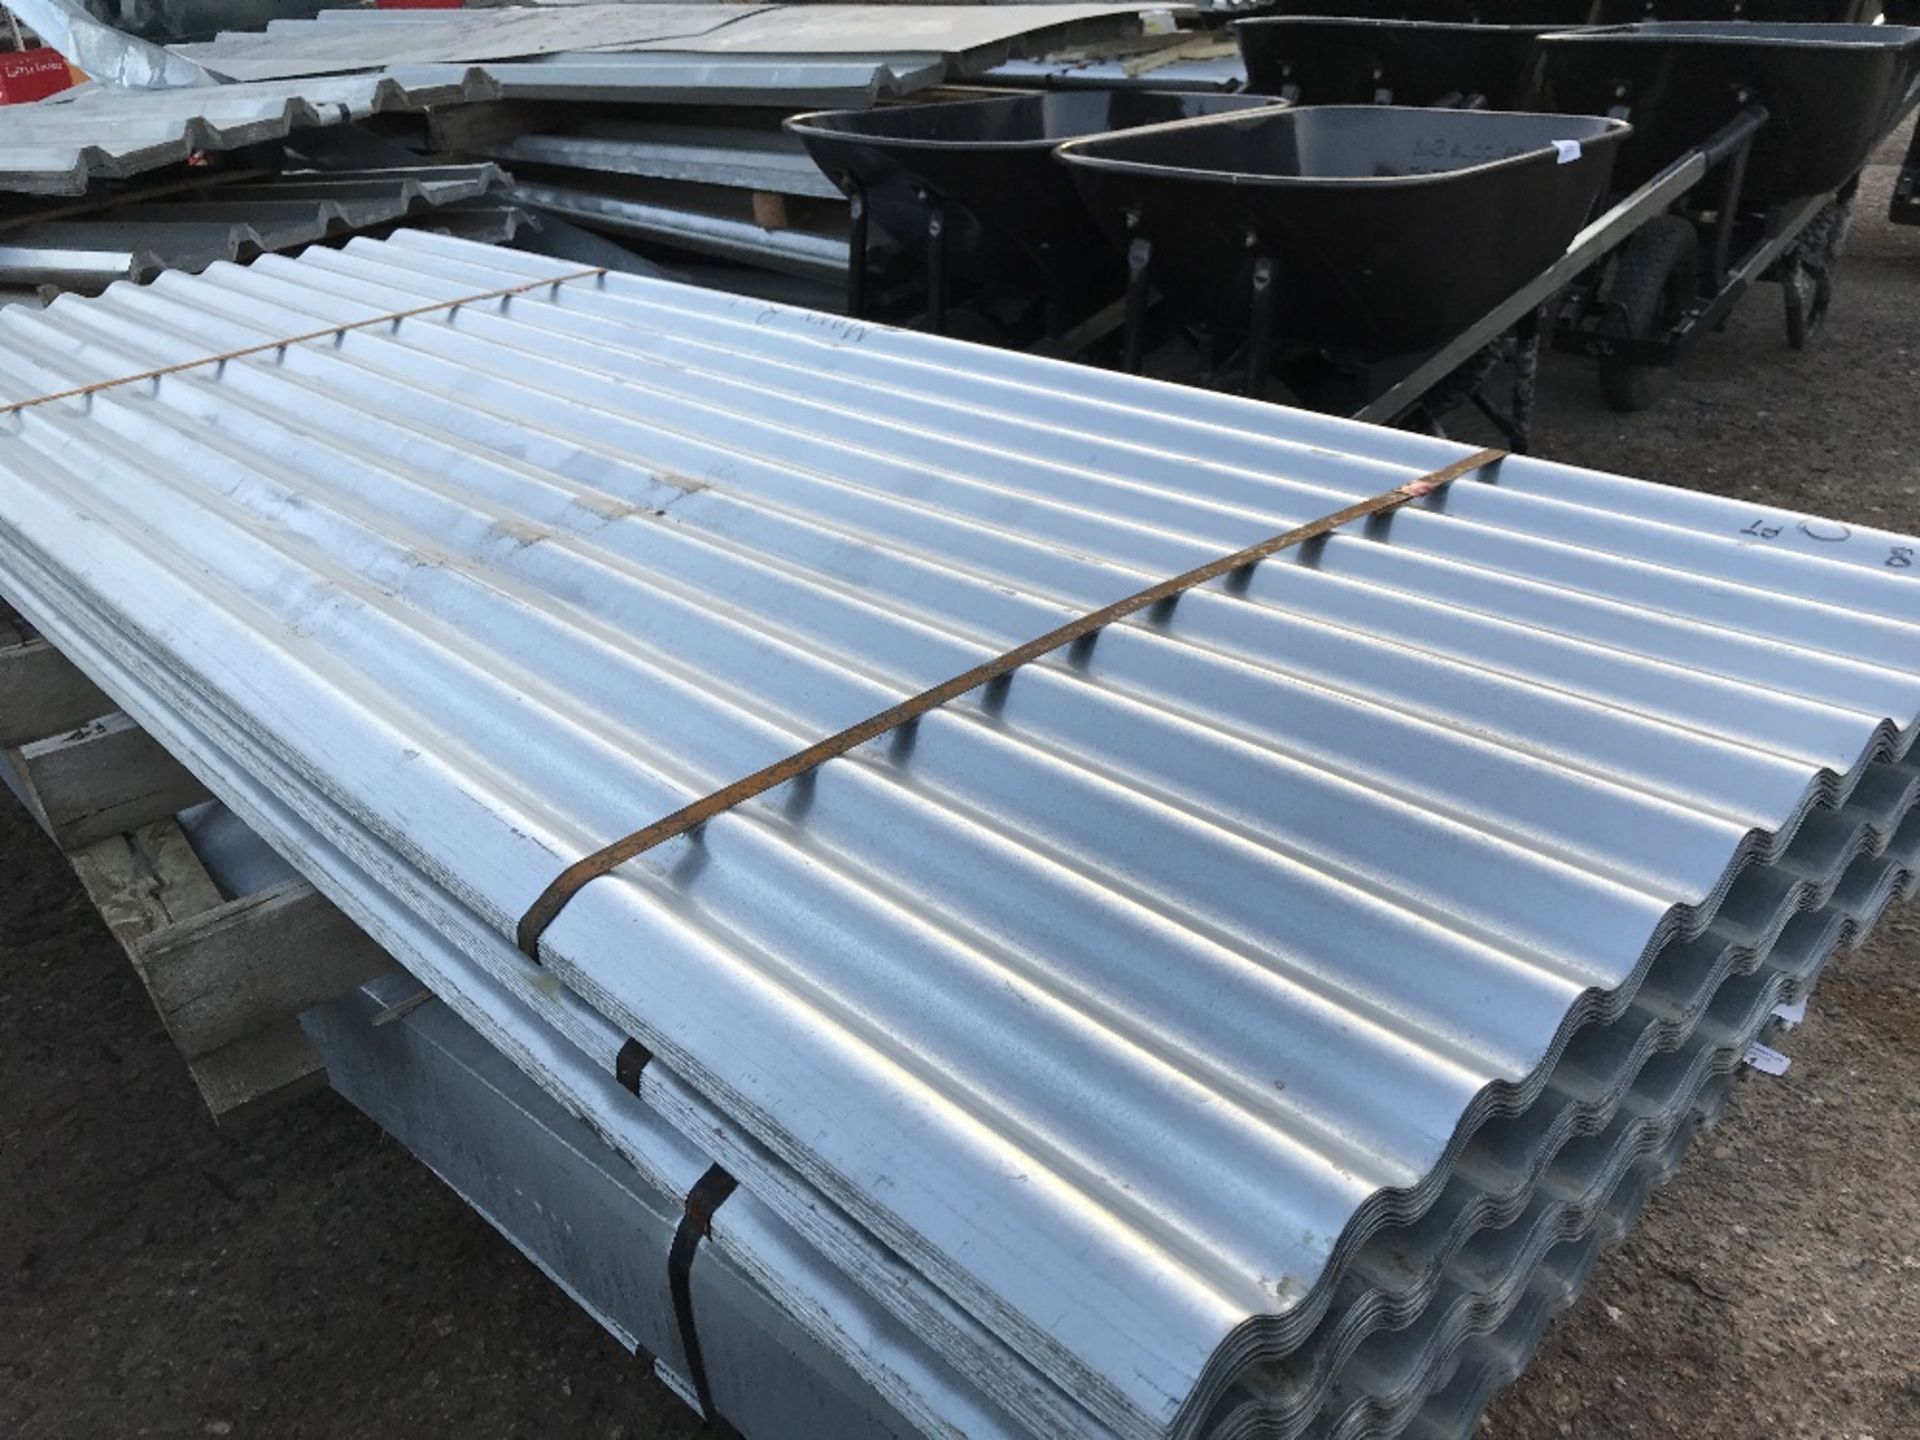 Pack of 25no. 10ft galvanised corrugated roof sheets